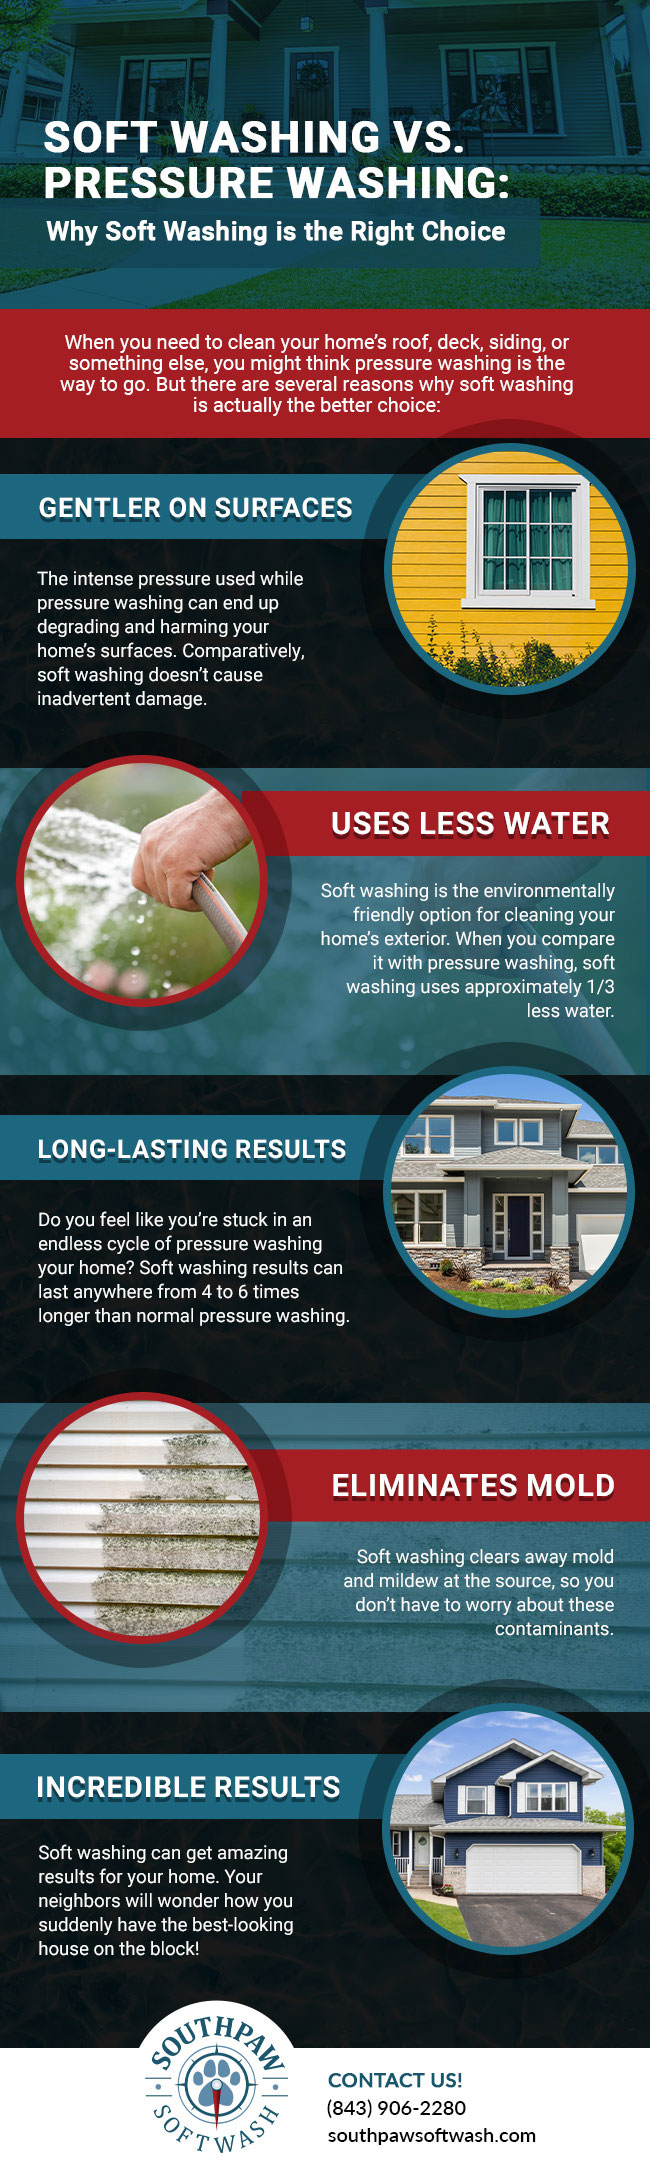 Soft washing is the right choice for your home. 